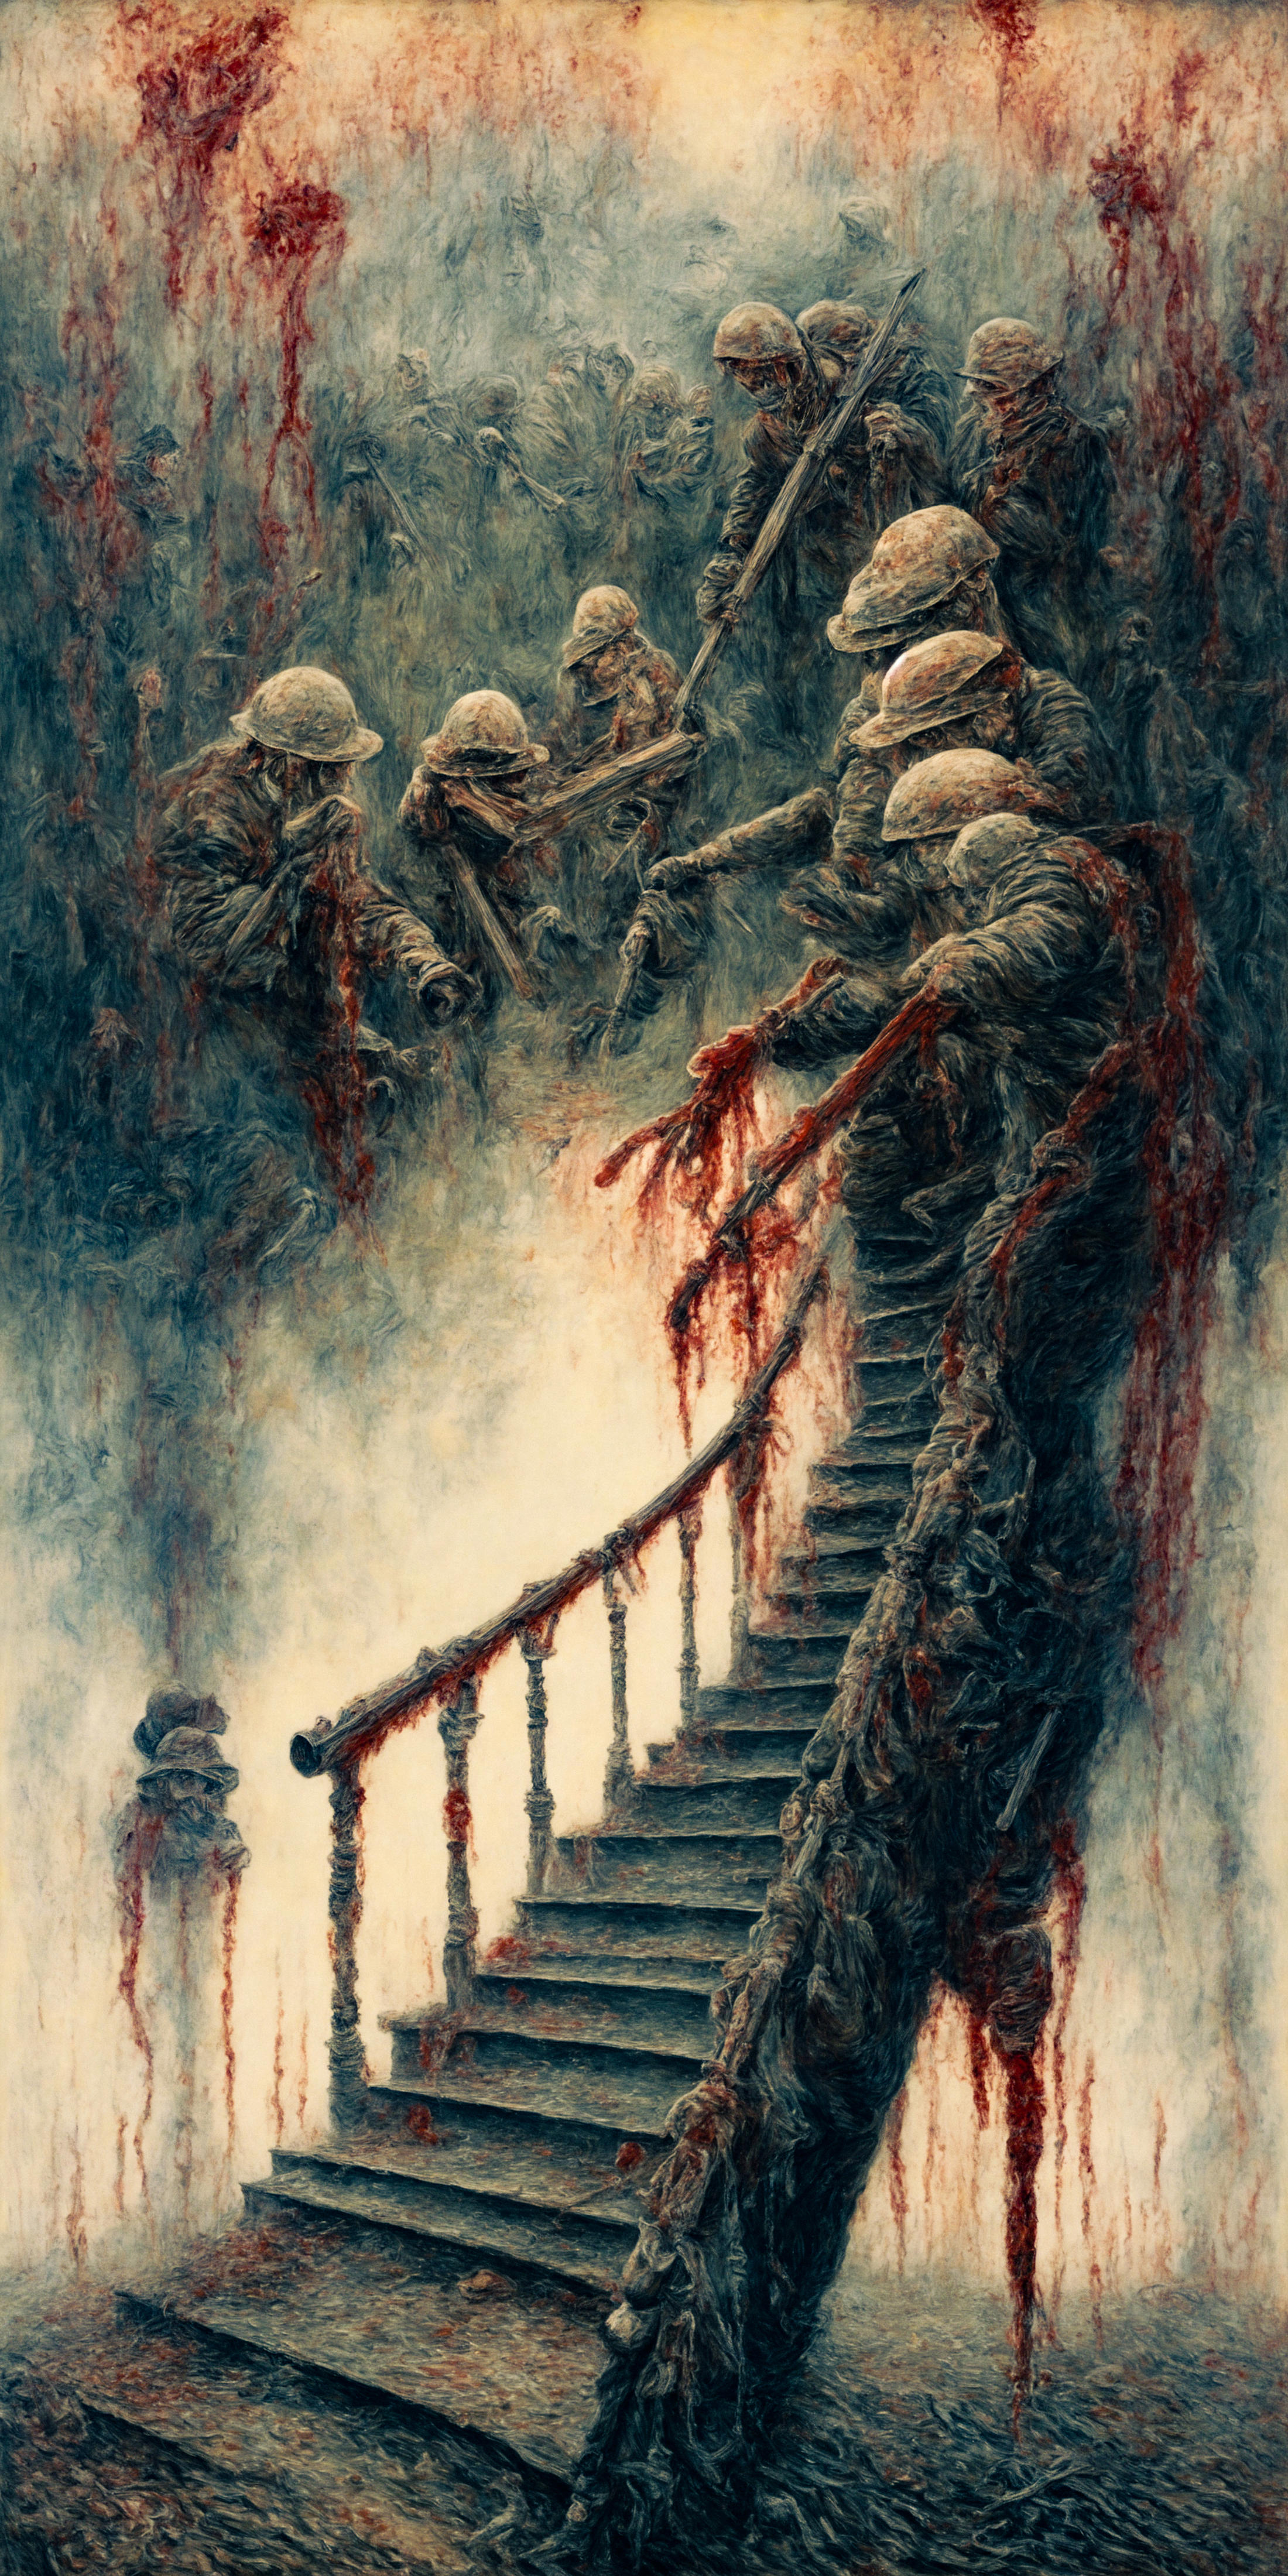 An Artistic Painting of Men and Zombies with Blood on Stairs